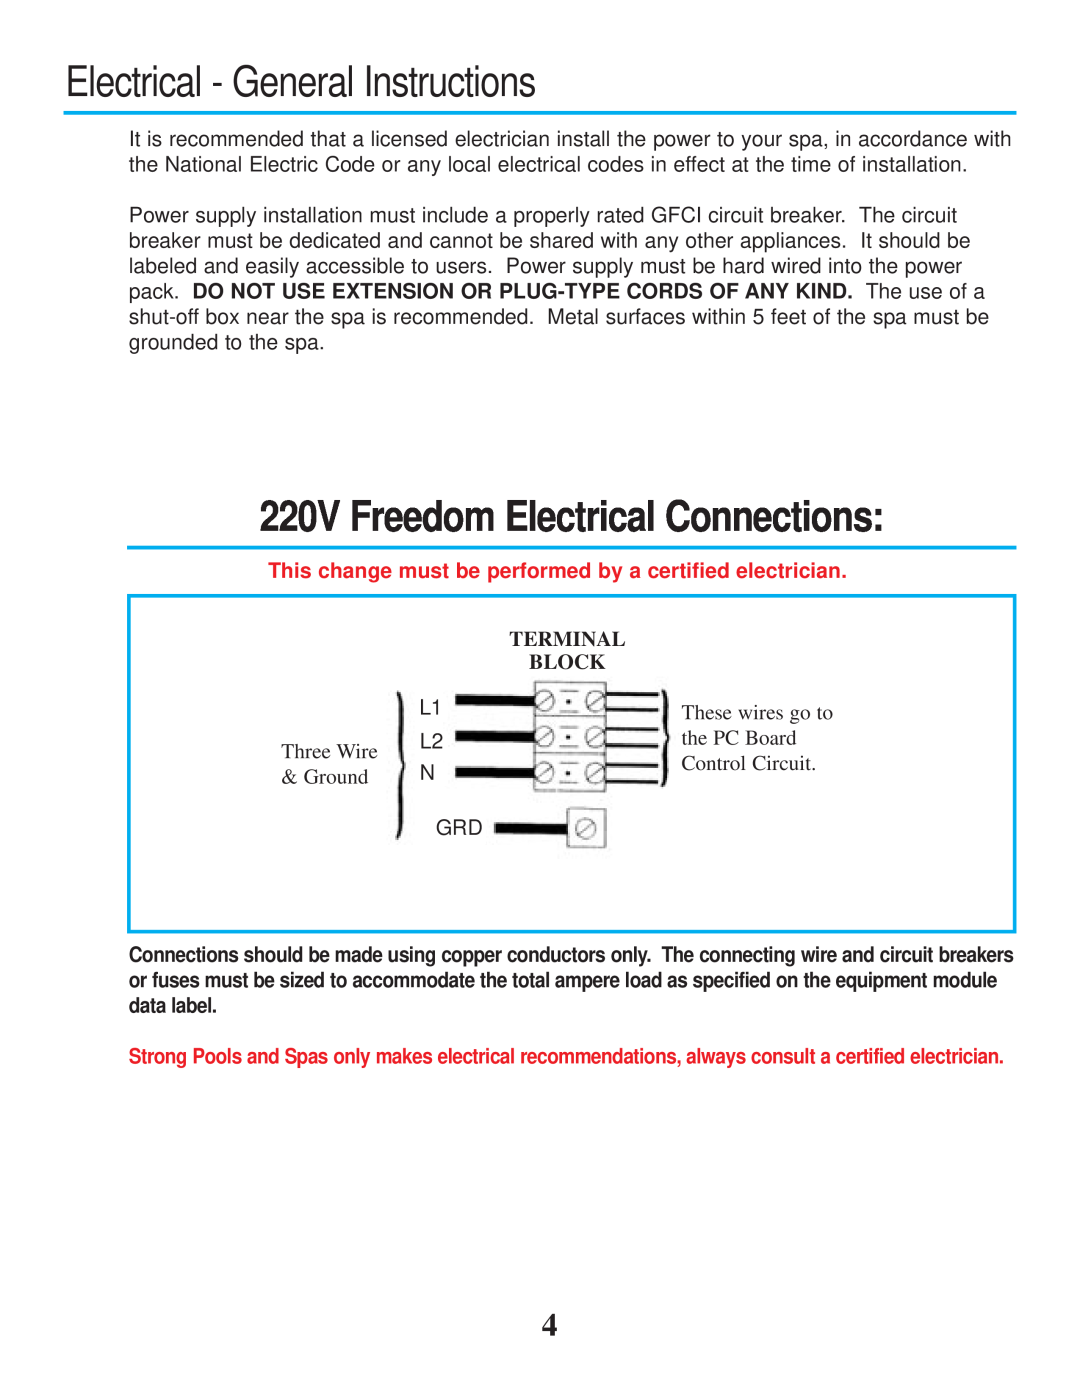 Strong Pools and Spas Electrical - General Instructions, 220V Freedom Electrical Connections, Three Wire, Ground 